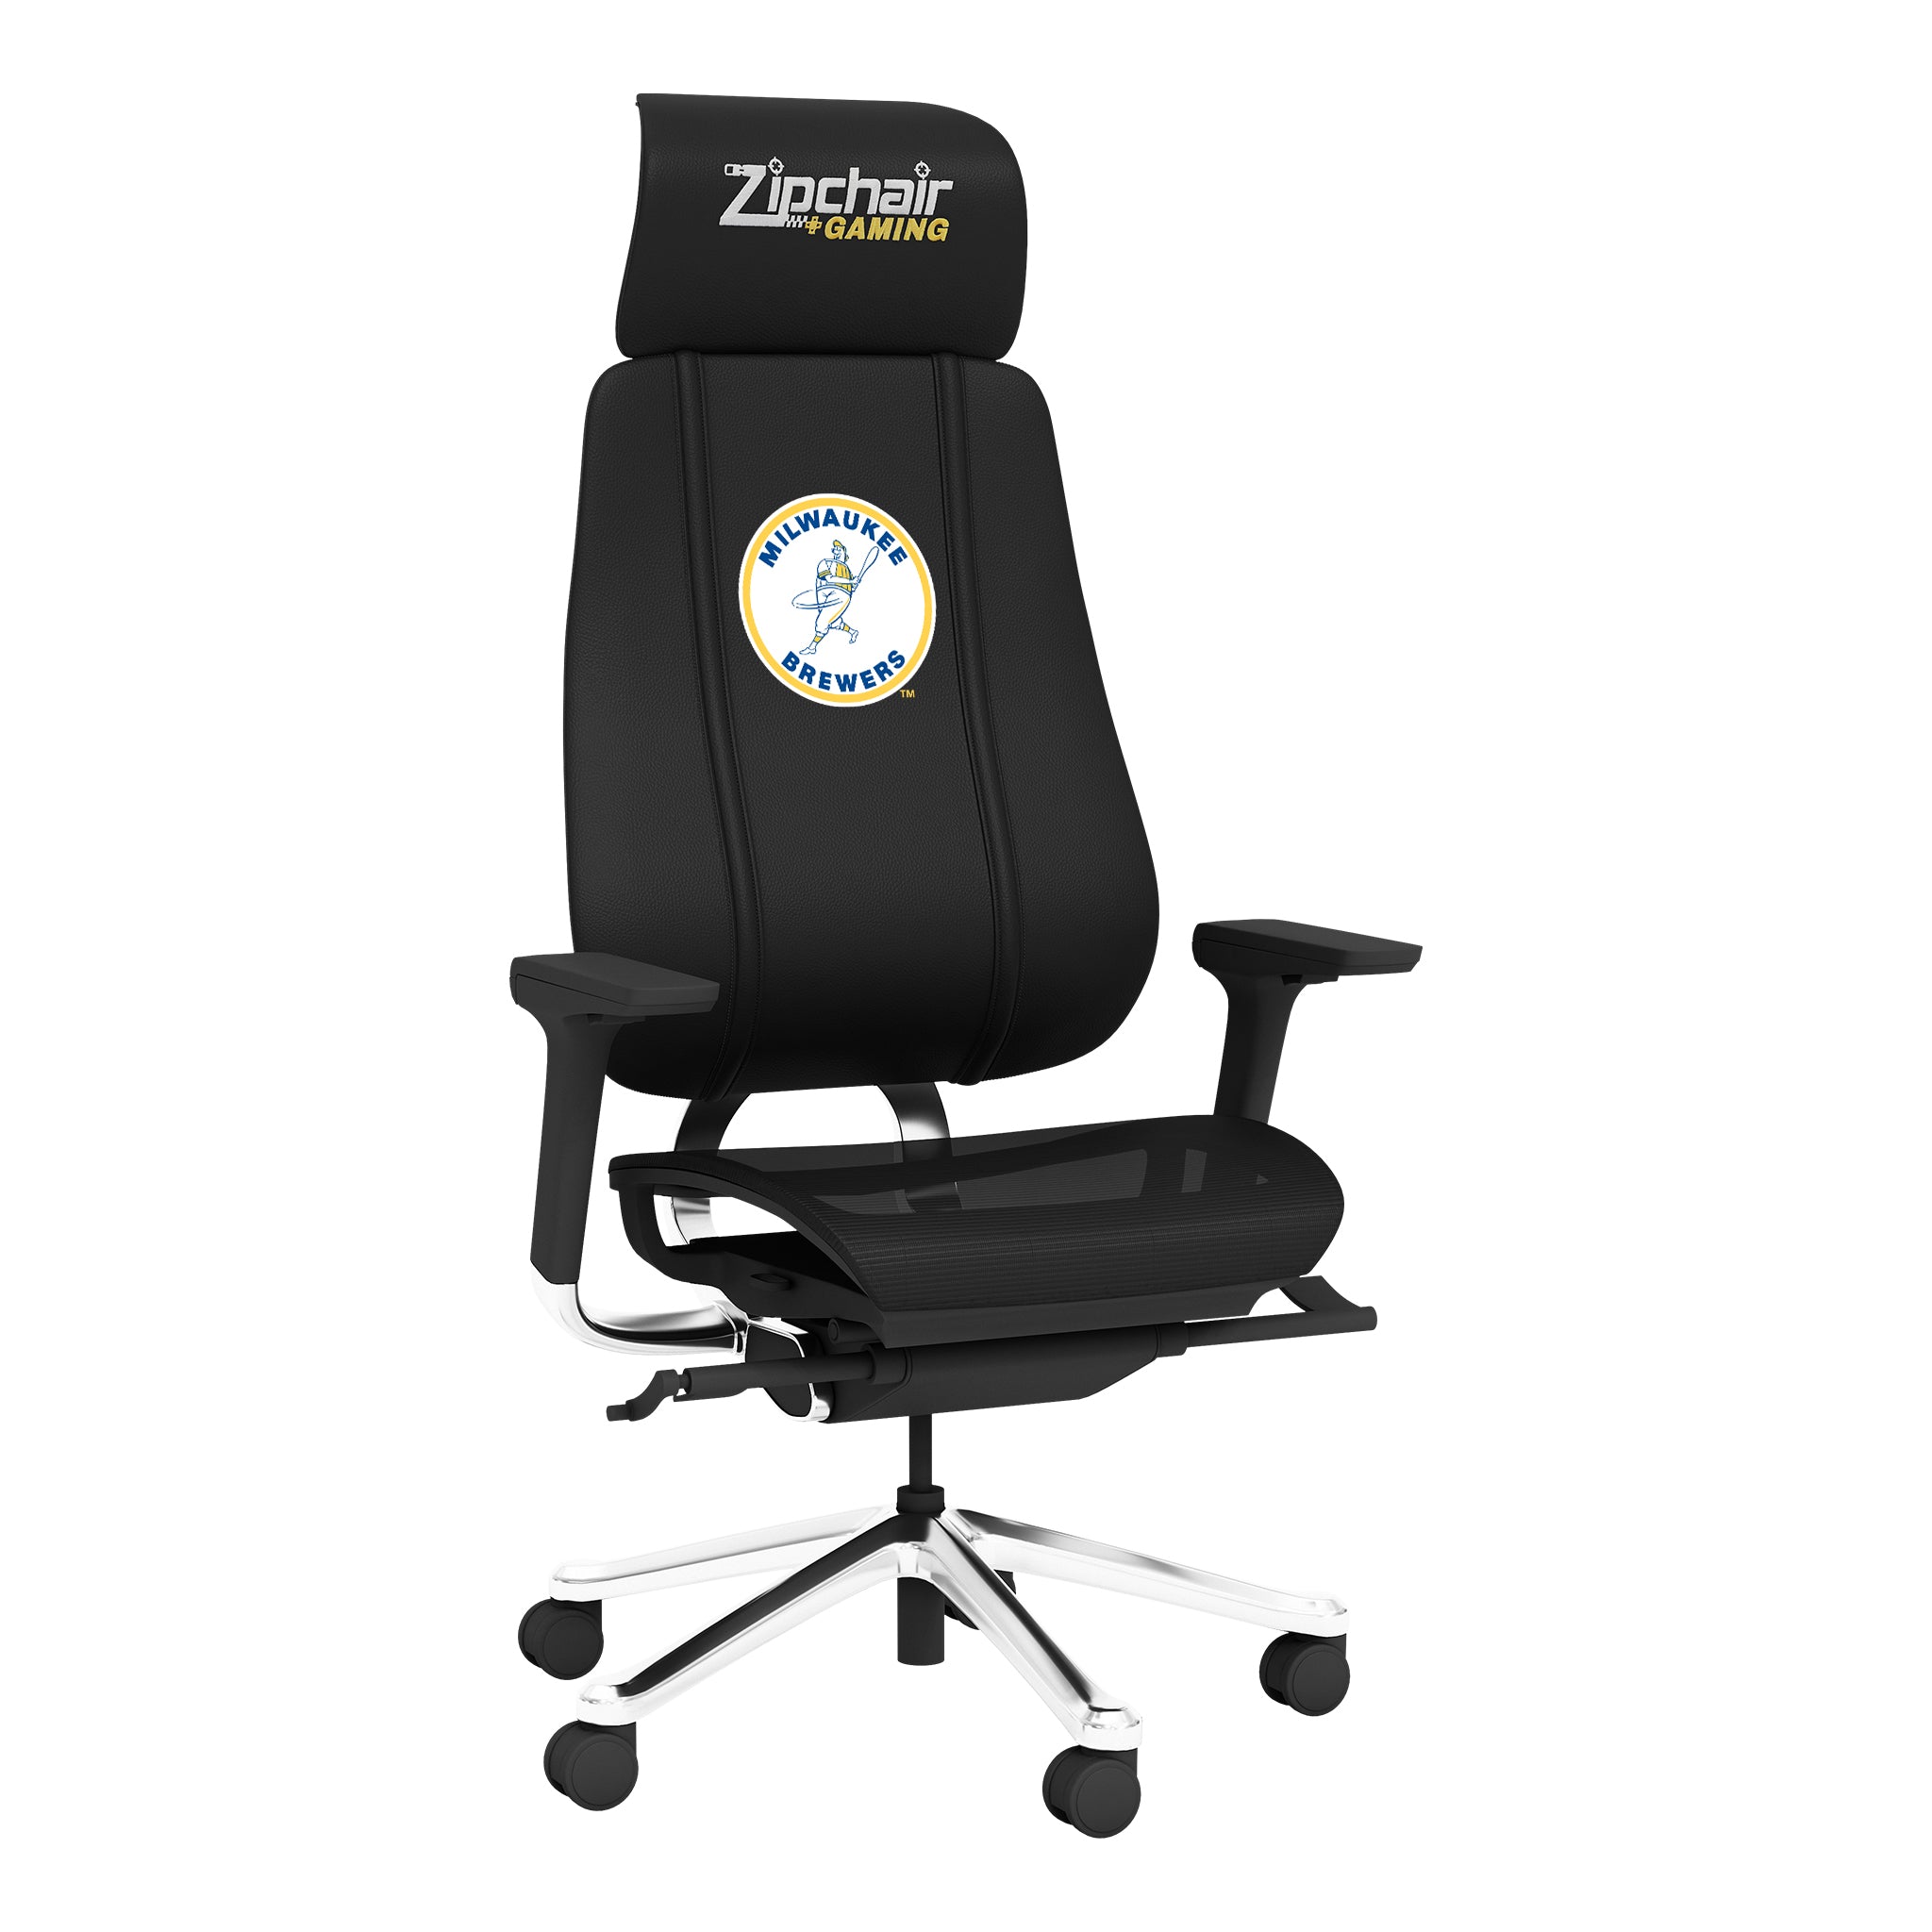 PhantomX Mesh Gaming Chair with Milwaukee Brewers Cooperstown Primary